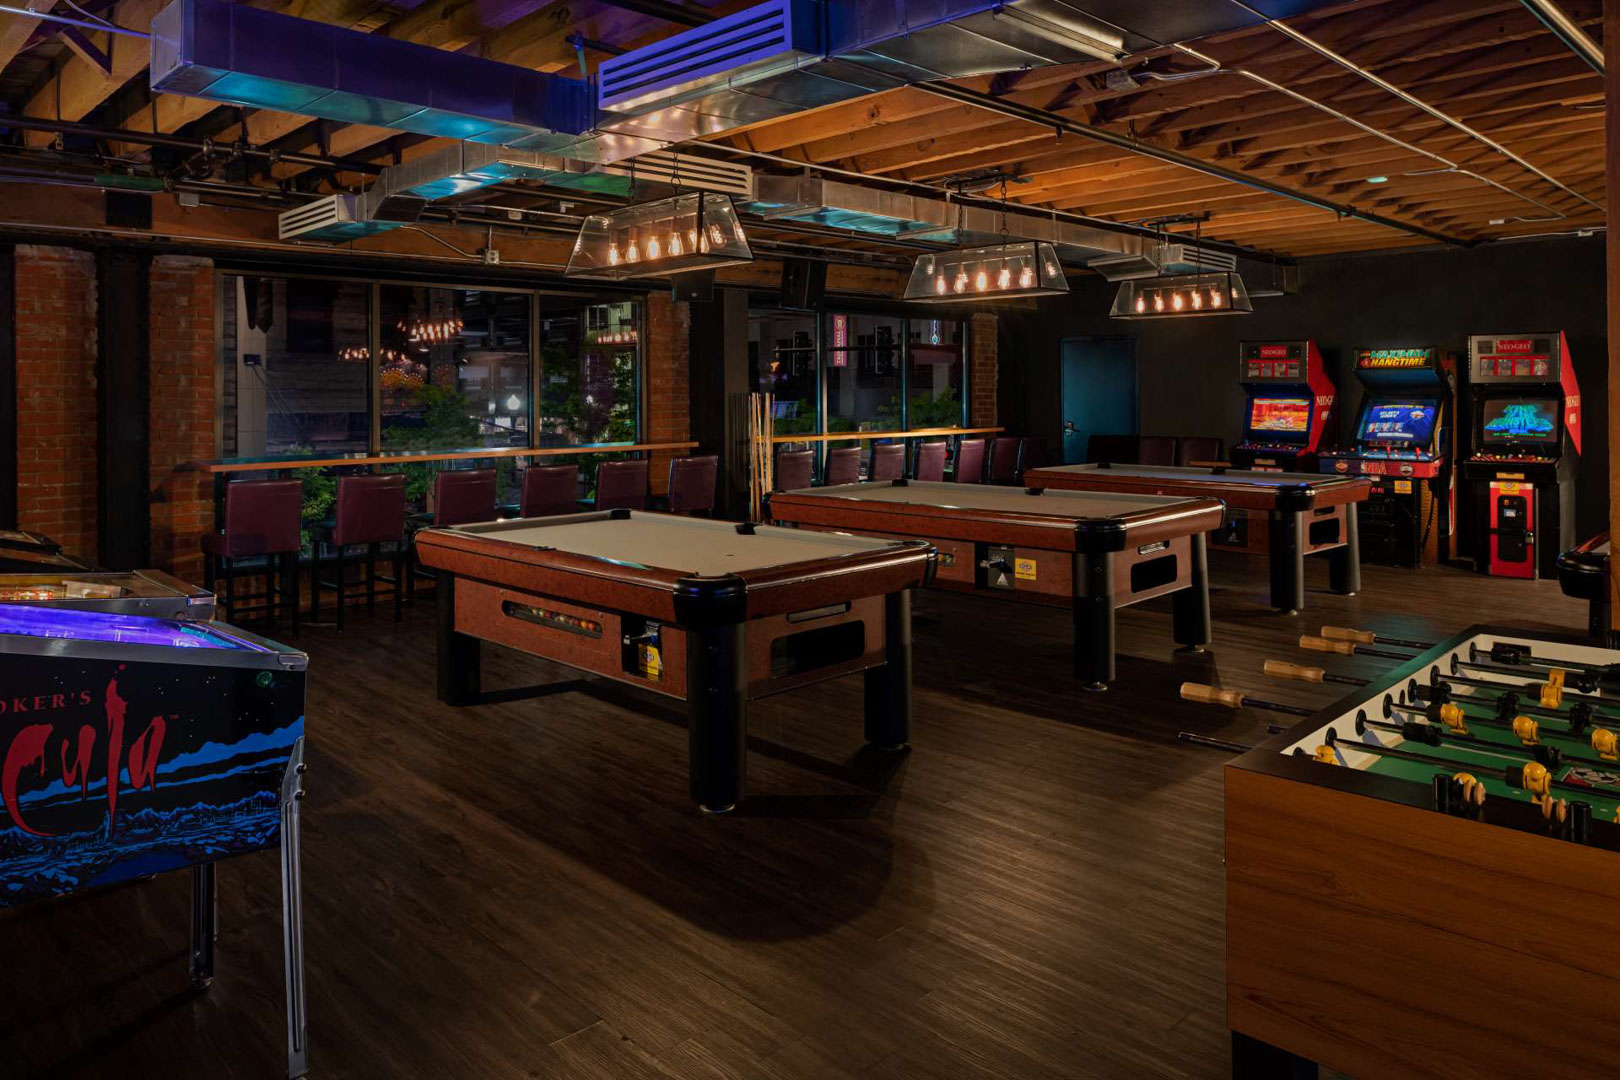 Pictures of the game room at Karma